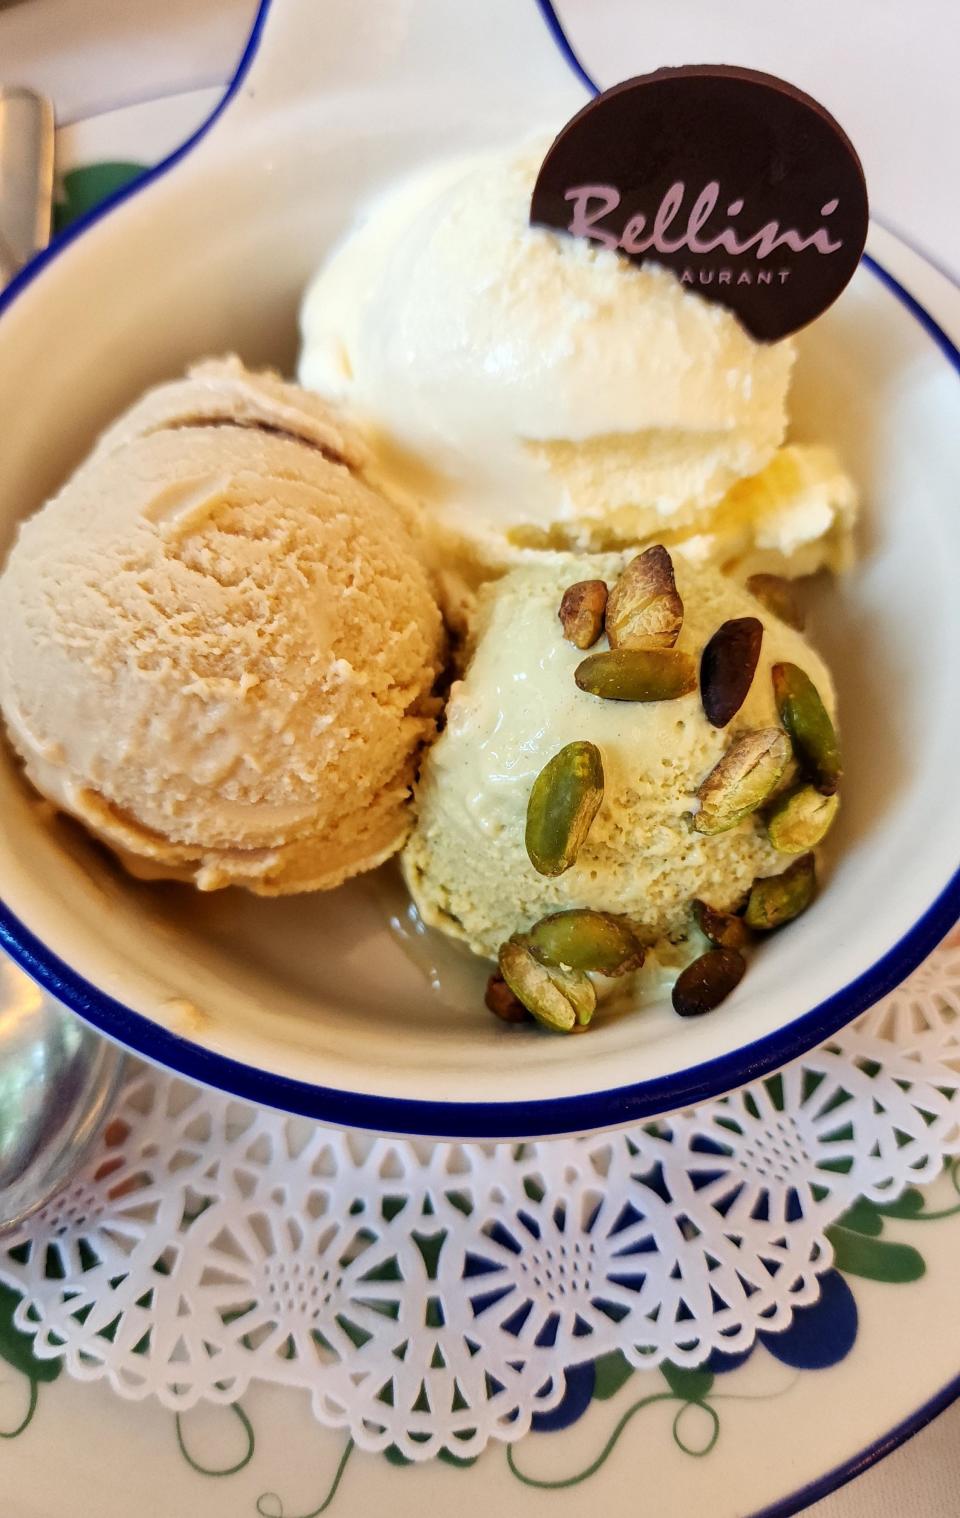 End the perfect brunch with a trio of homemade gelato at Bellini.